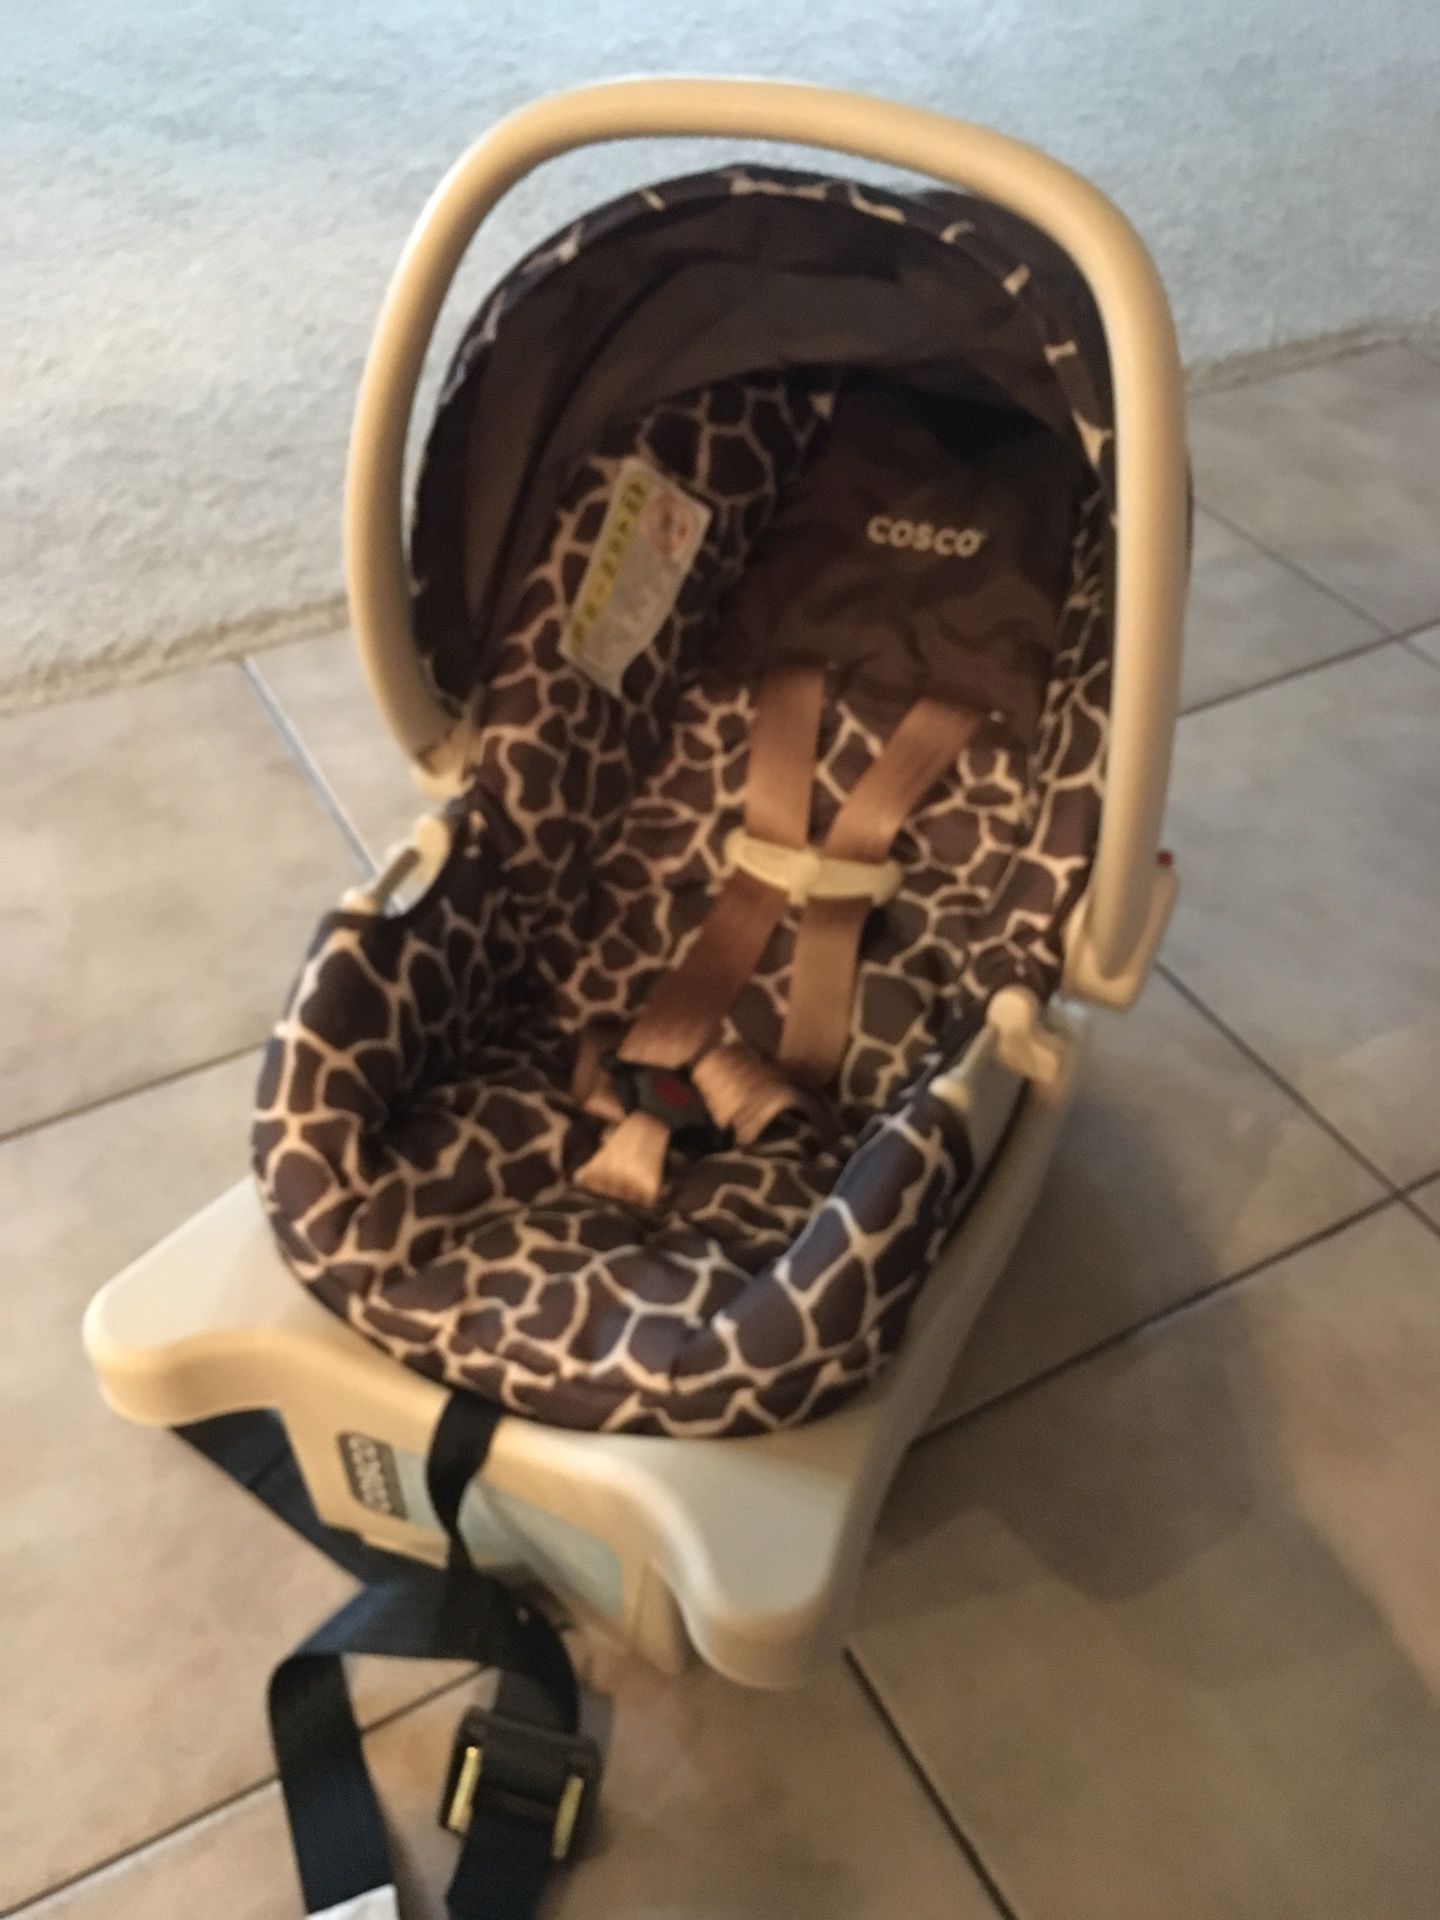 Baby car seat with base